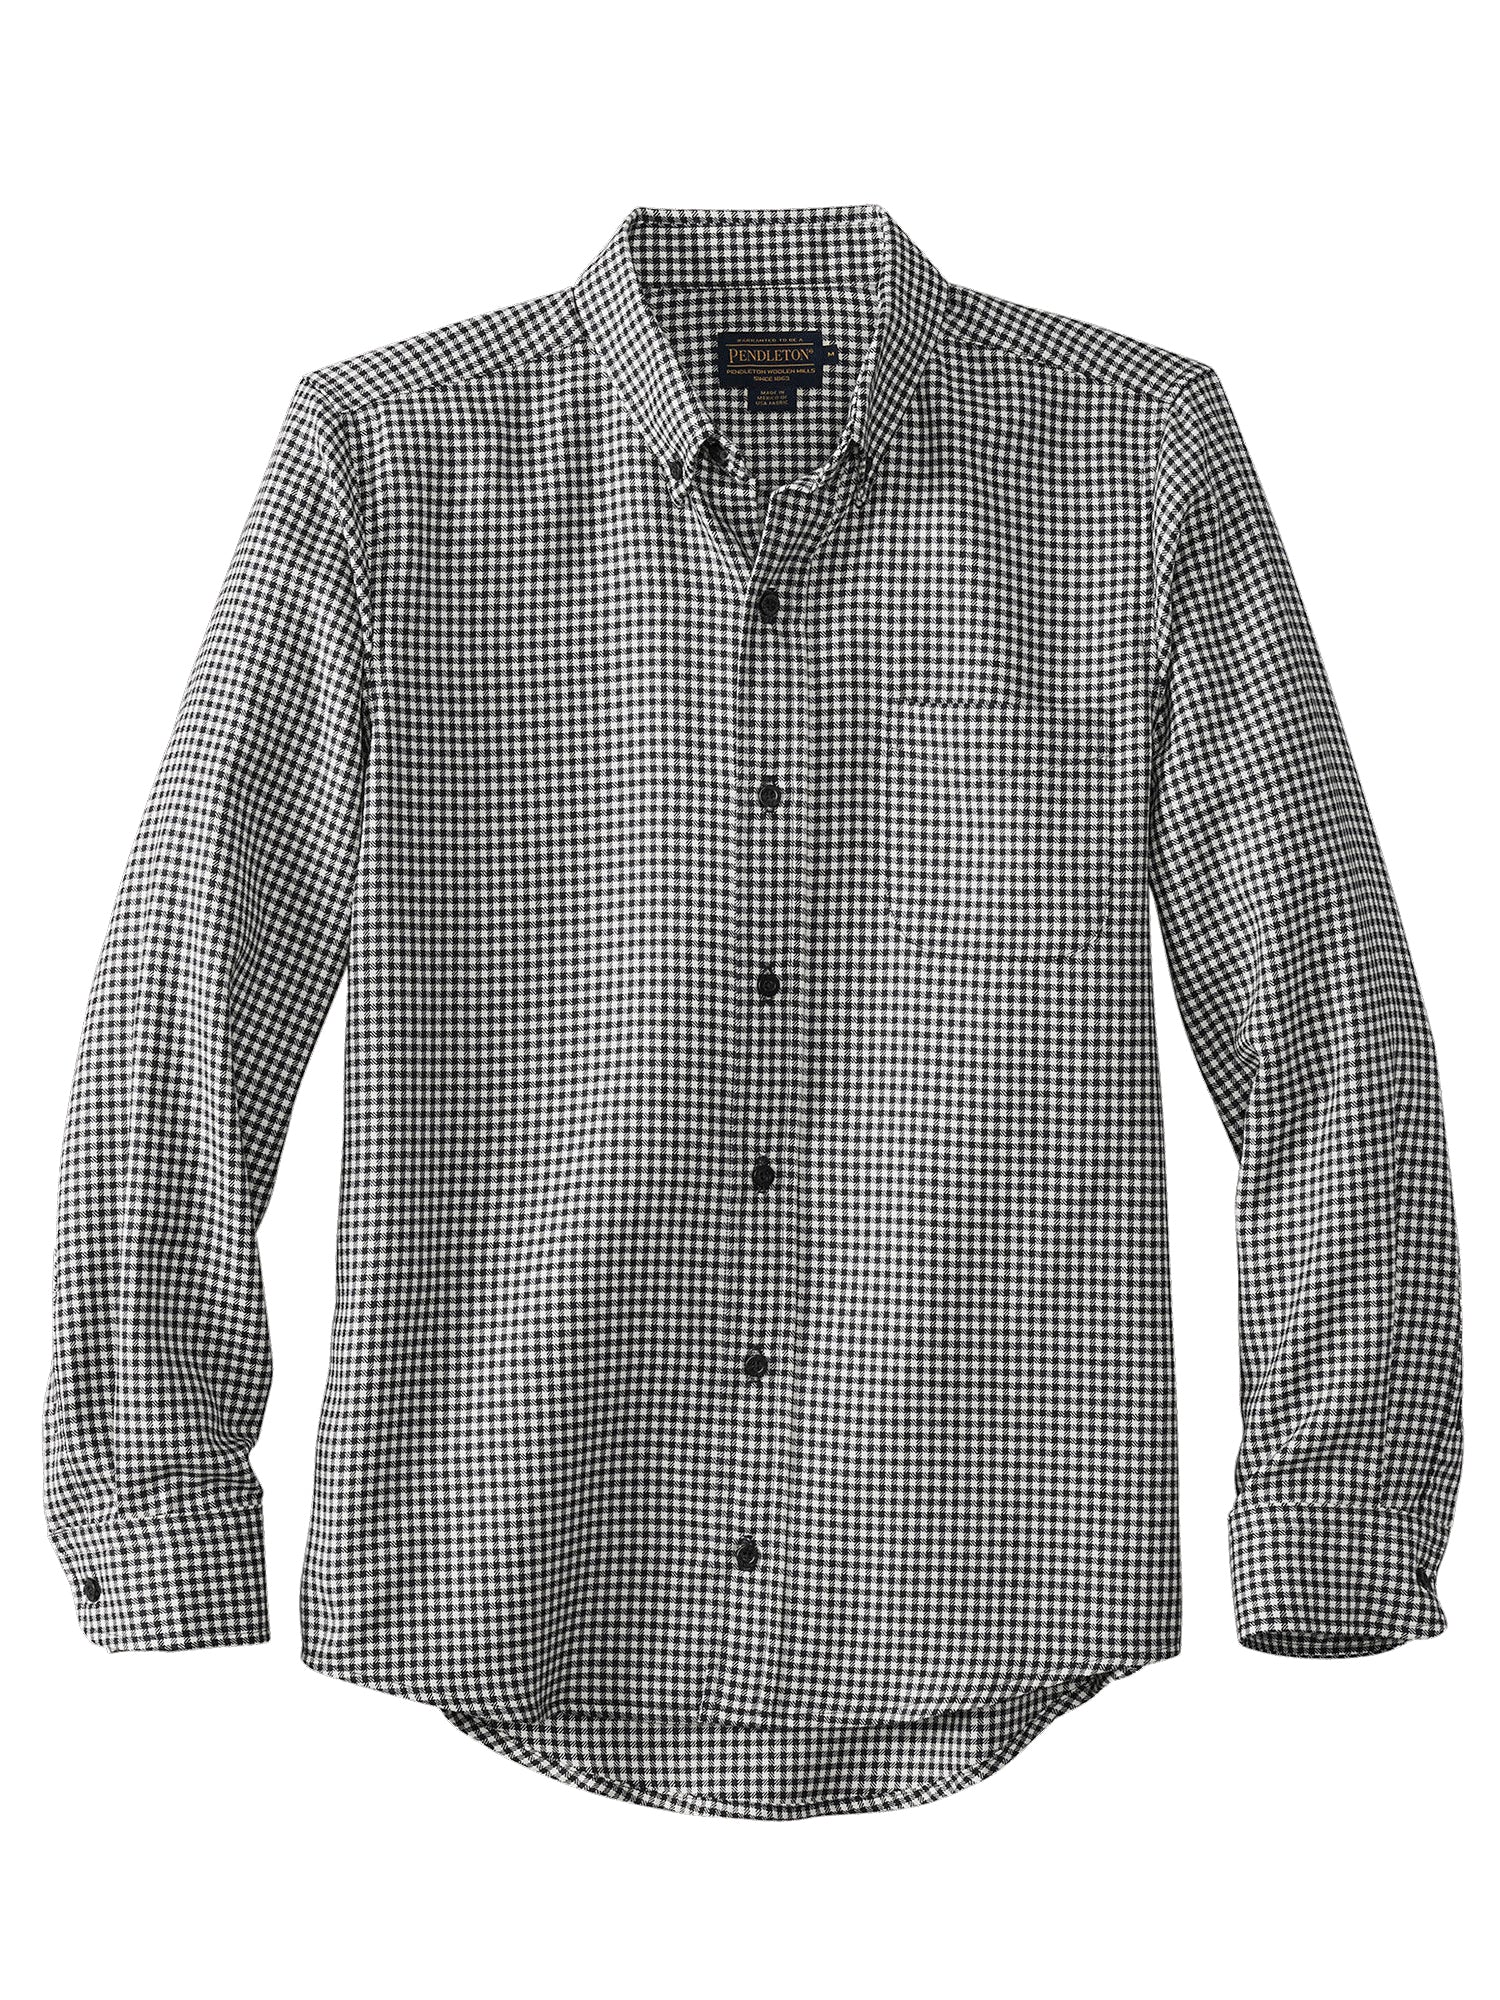 Pendleton 100% Worsted Wool Fitted Sport Shirts RA101-11045